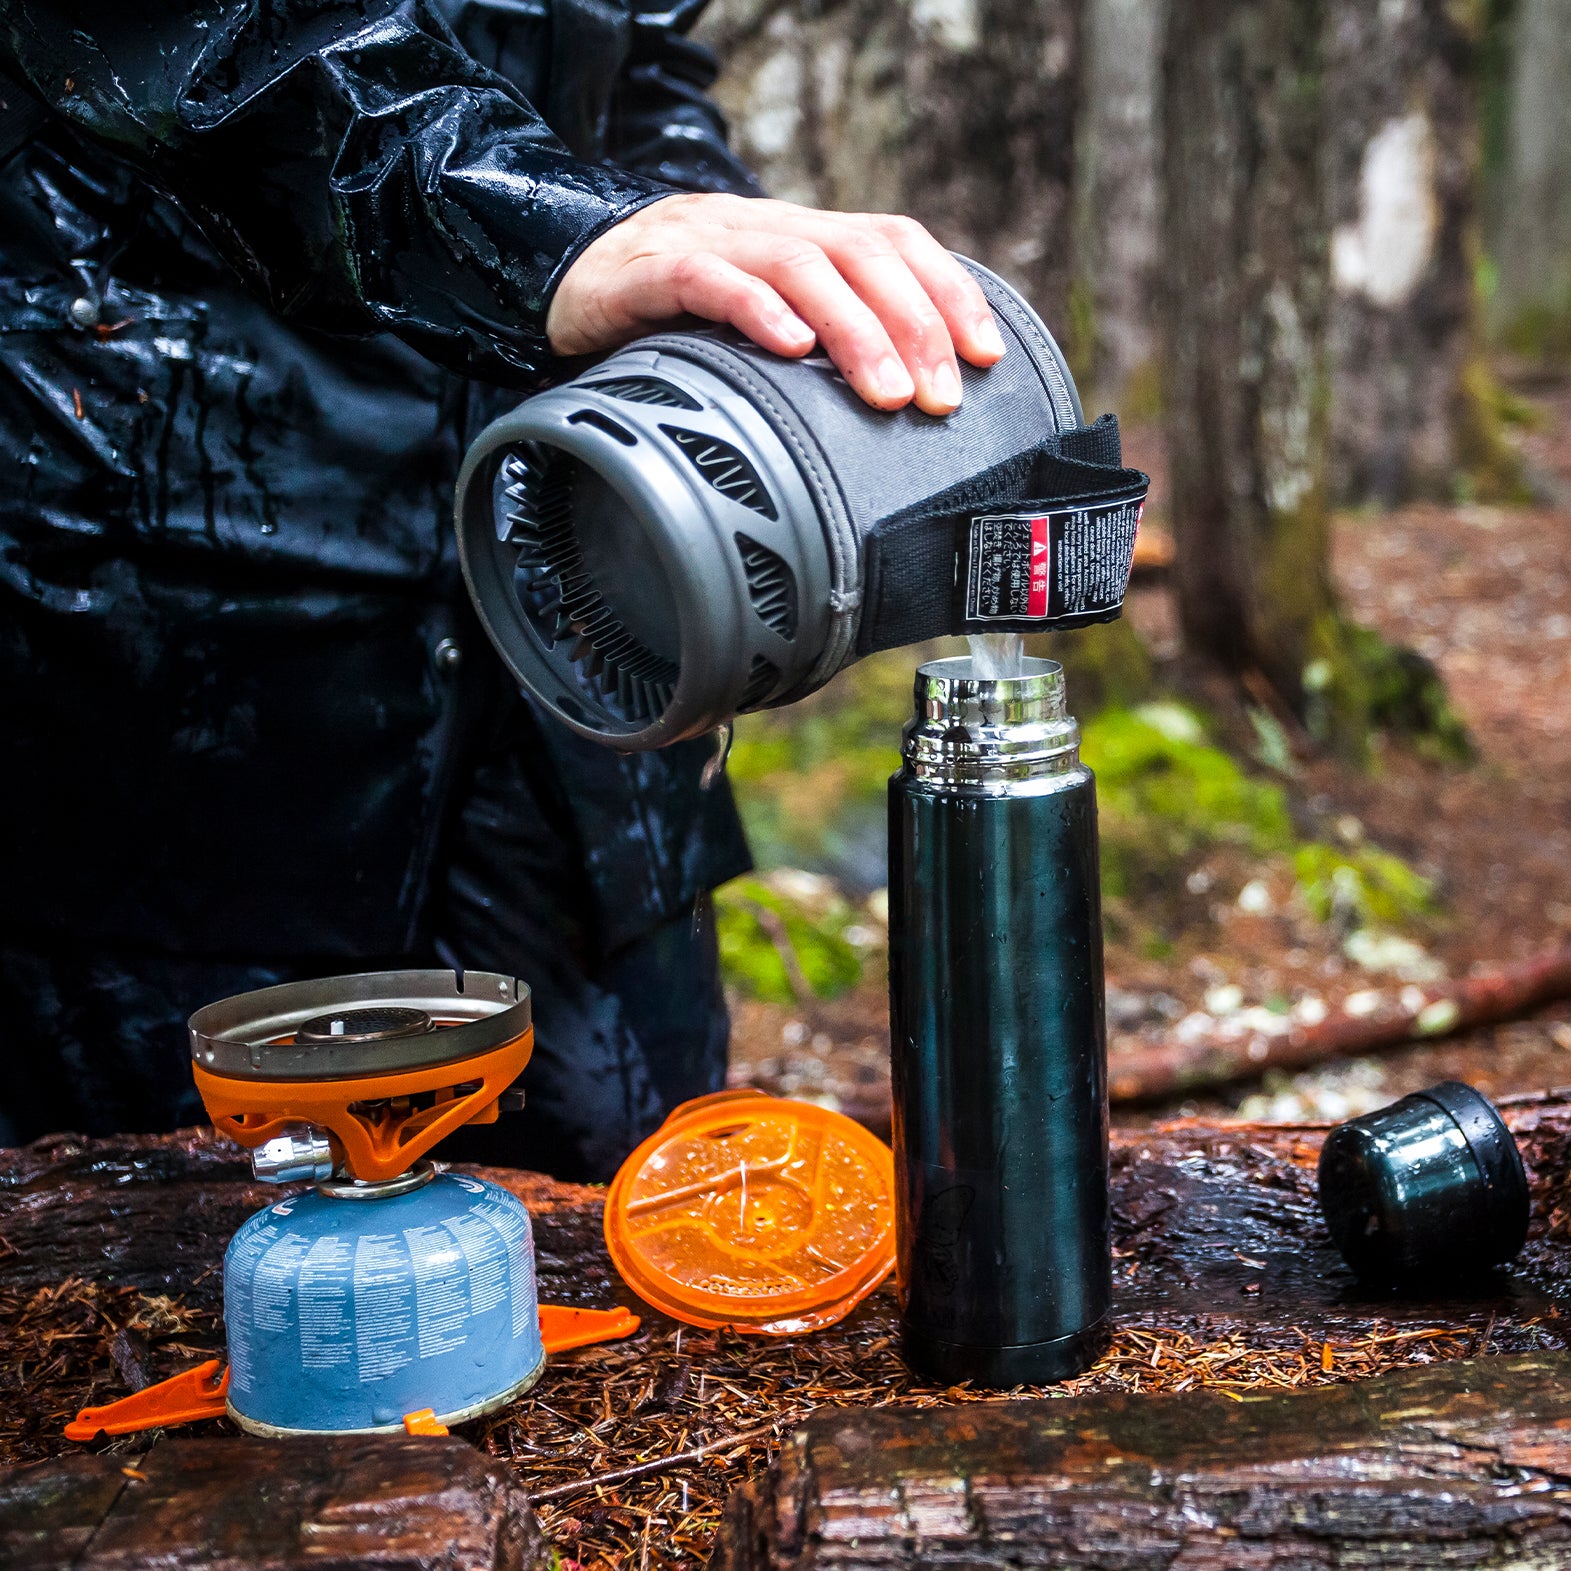 https://cdn.outsideonline.com/wp-content/uploads/2020/11/25/thermos-woods-howto_s.jpg